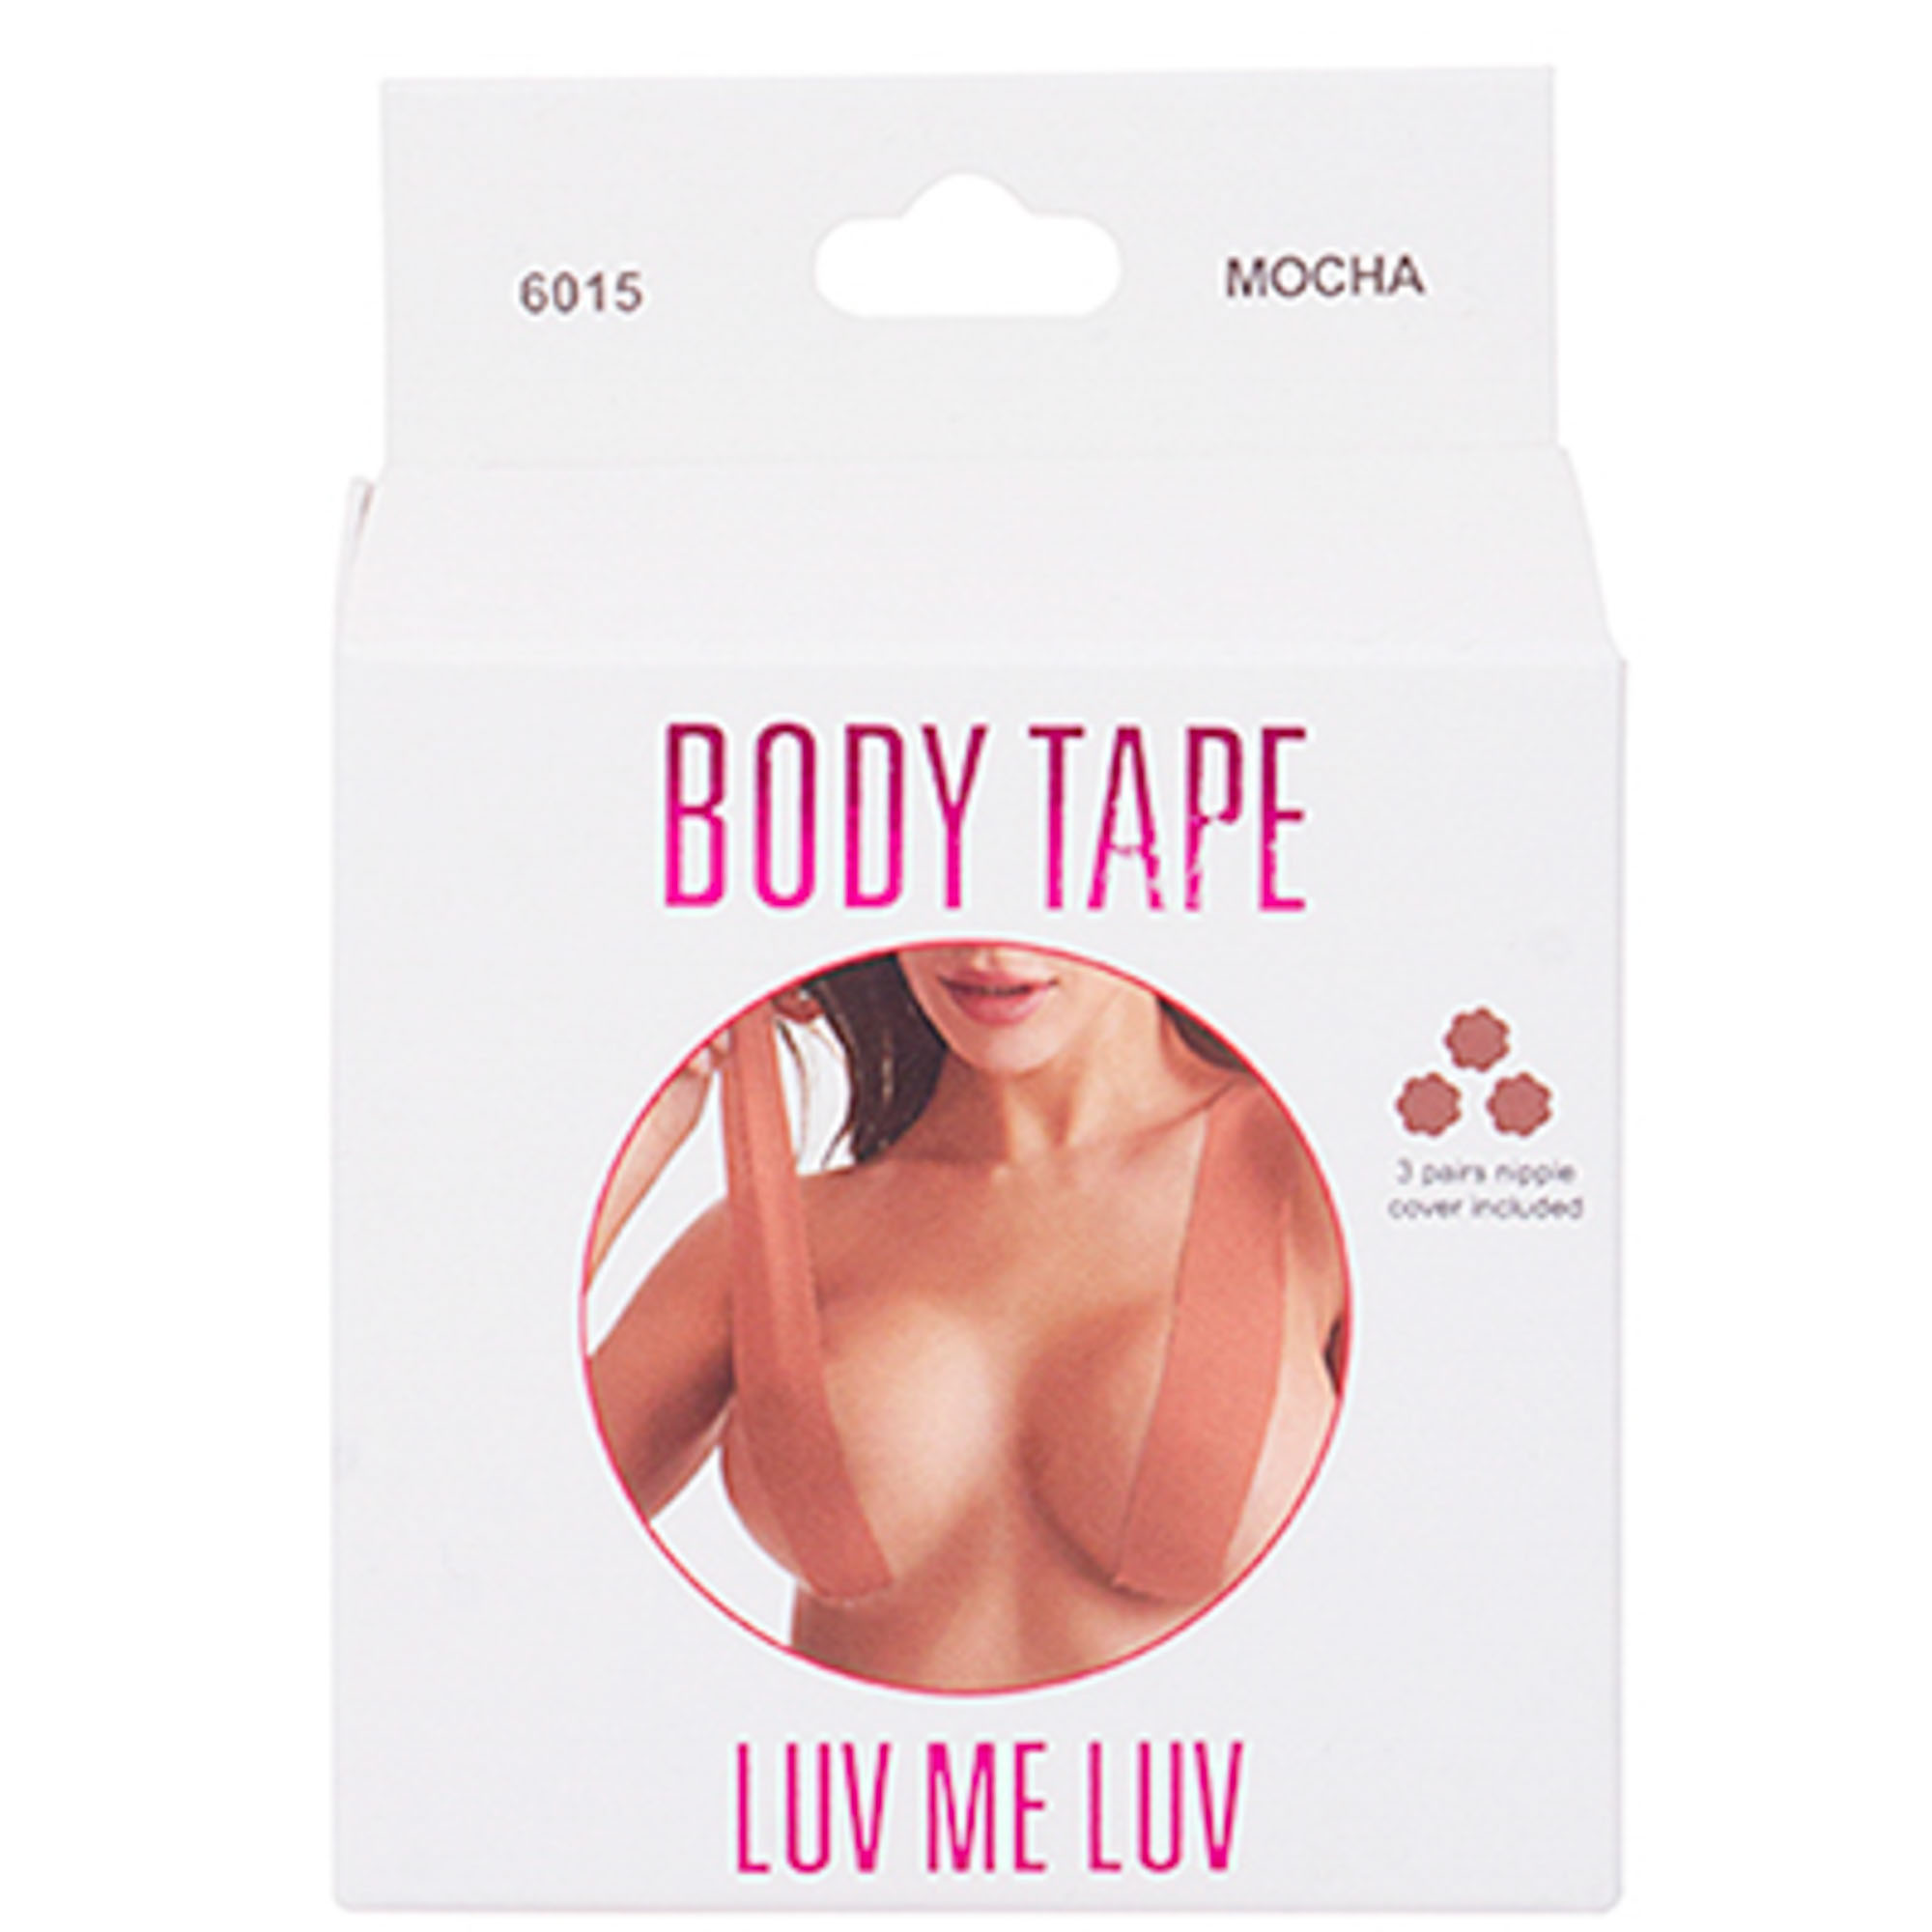 LUV ME LUV BODY TAPE WITH 3 PAIRS NIPPLE COVER